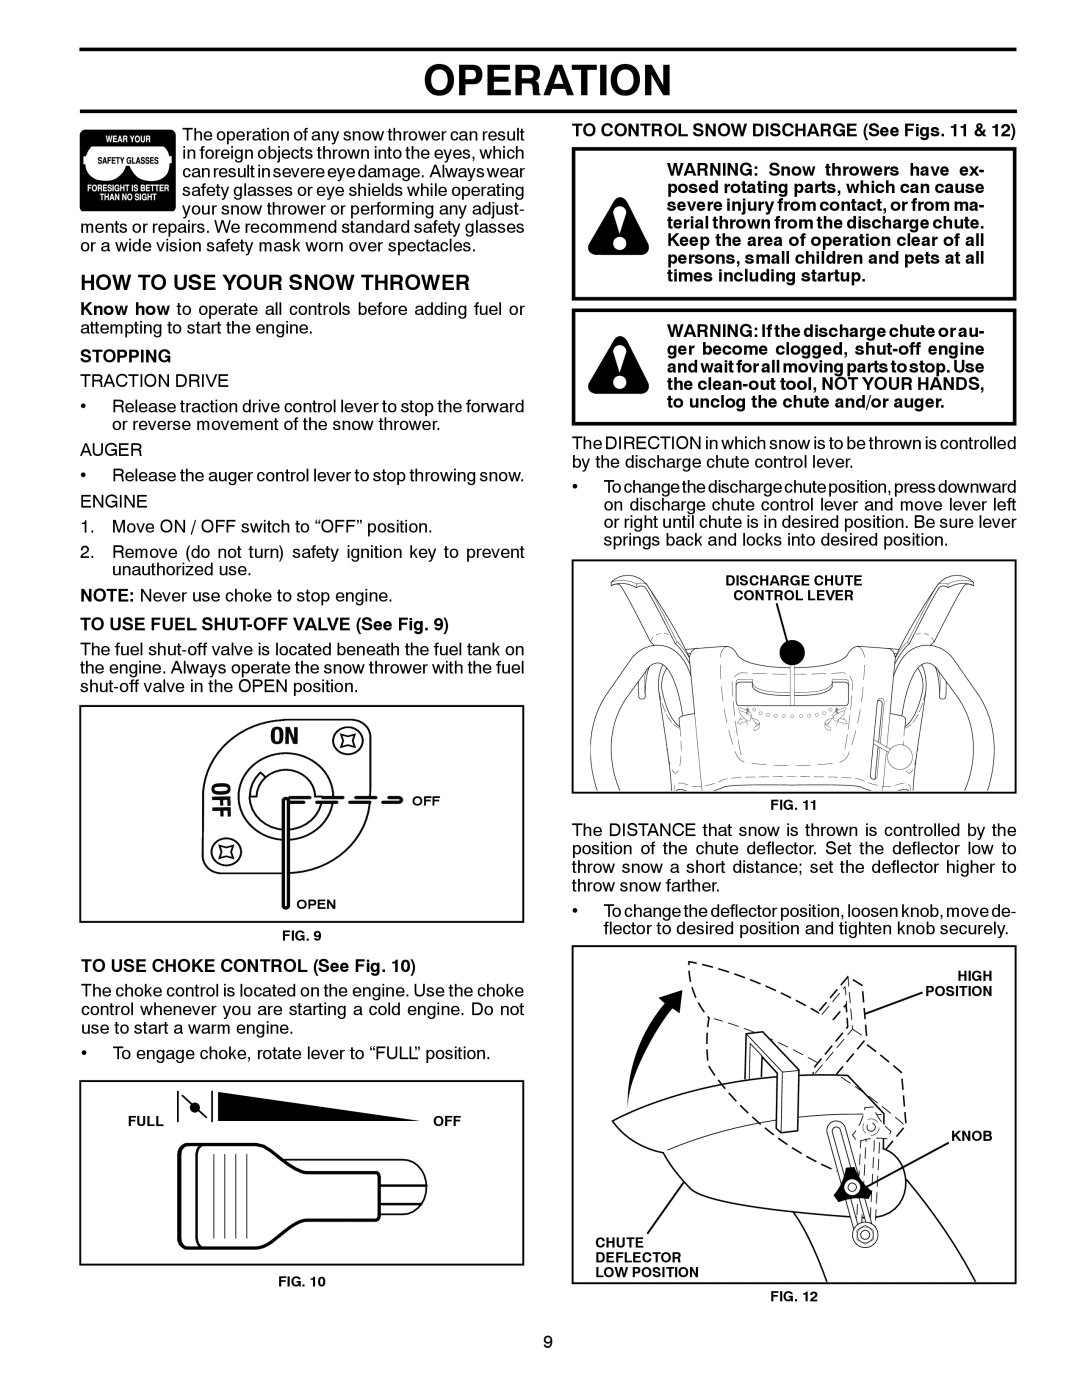 Husqvarna 1827SB manual How To Use Your Snow Thrower, Operation, Stopping, TO USE FUEL SHUT-OFFVALVE See Fig 